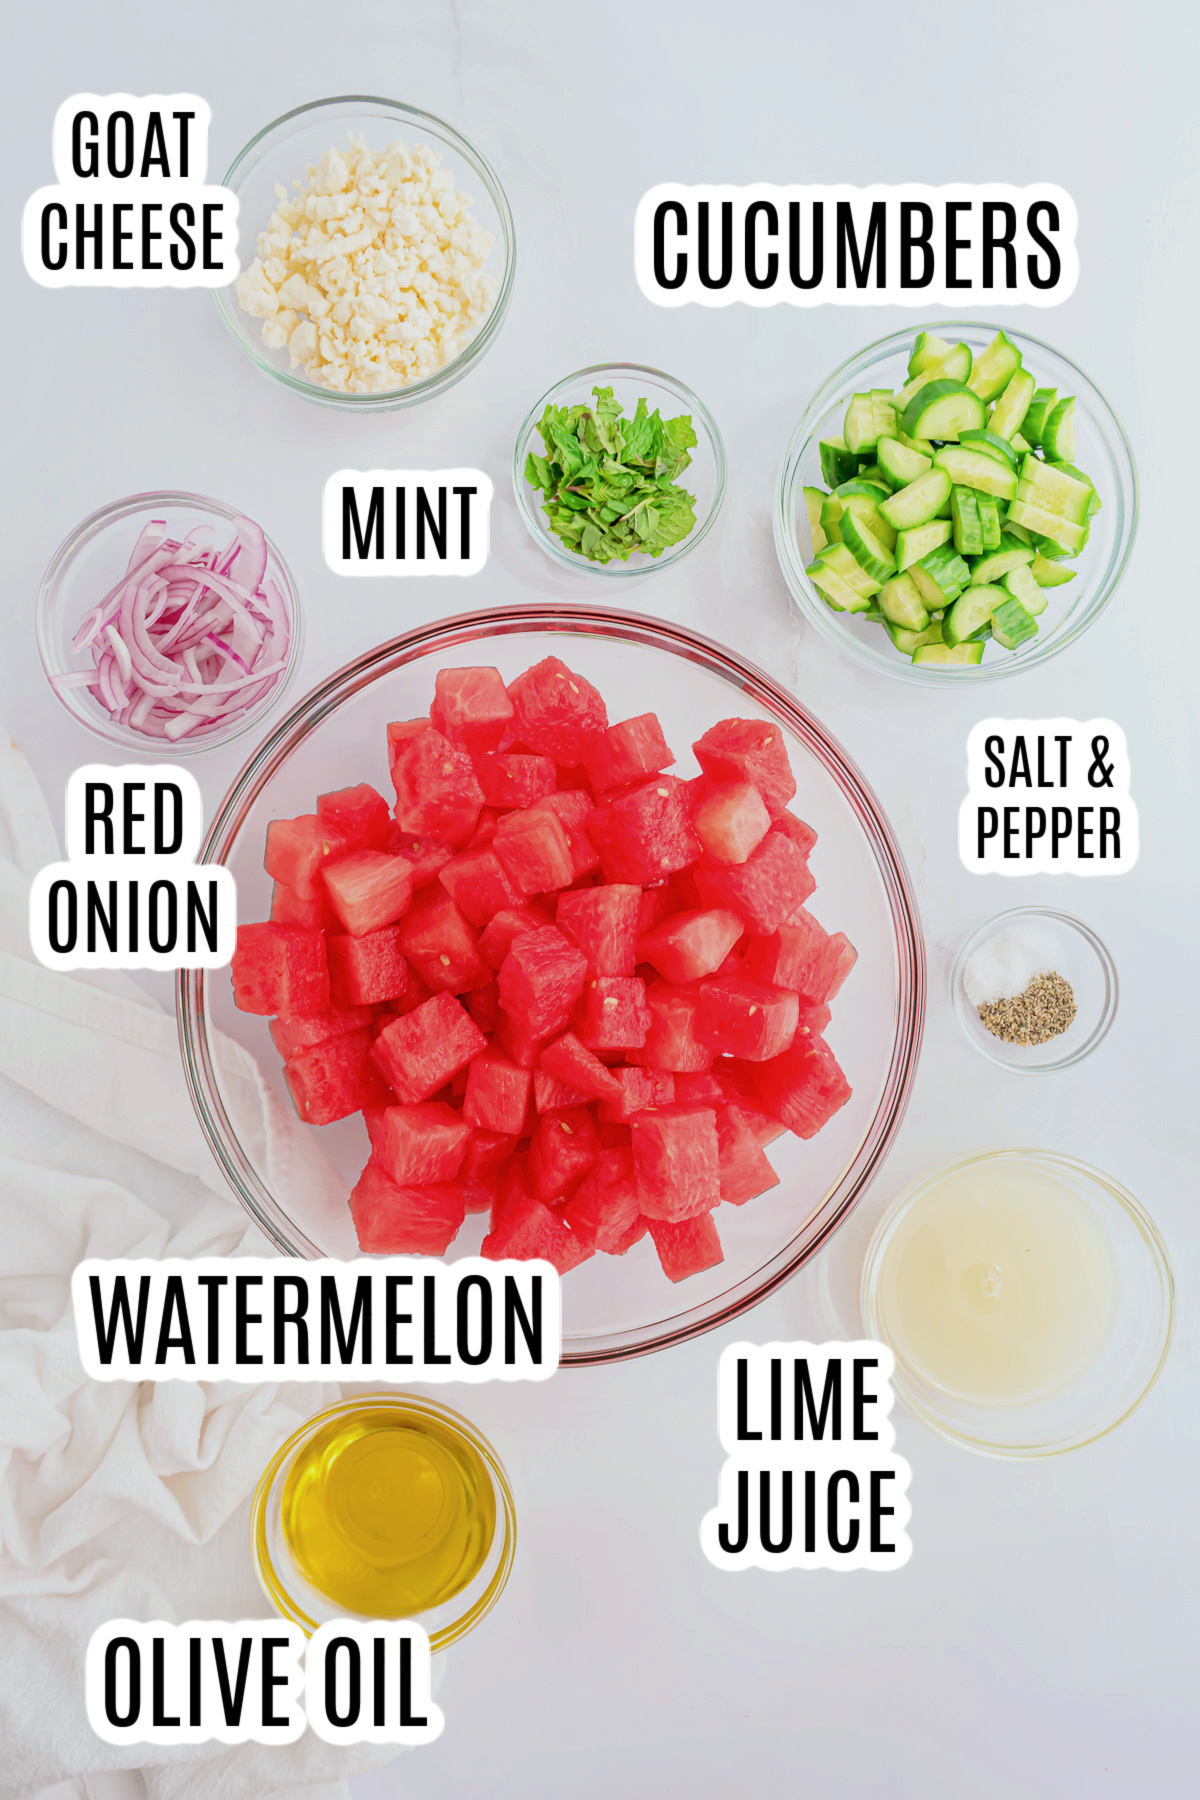 The ingredients needed to make the Watermelon Salad with Goat Cheese include cucumbers, fresh mint, sliced red onions, goat cheese, watermelon, salt, pepper, lime juice and olive oil.